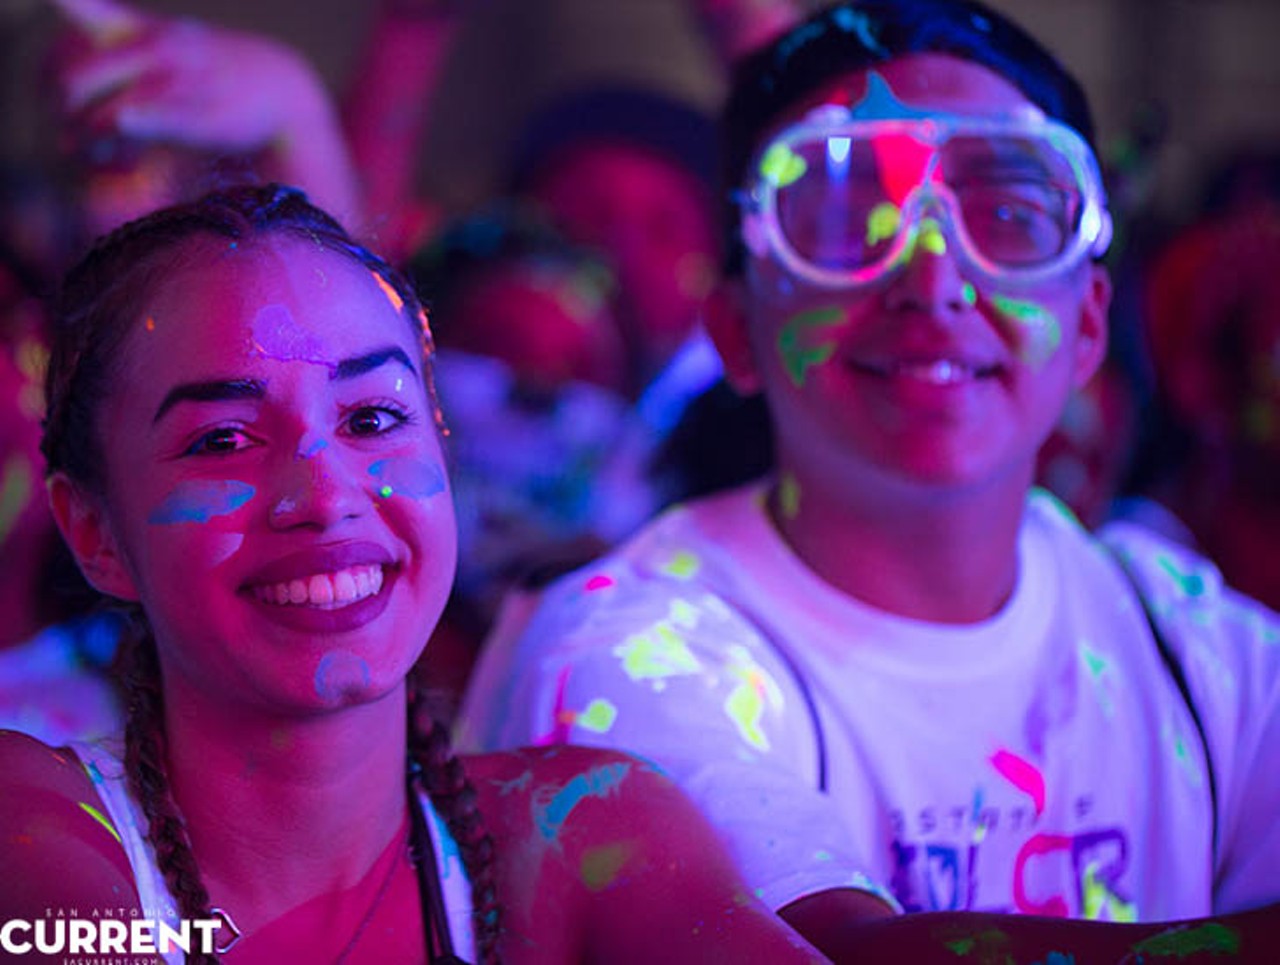 33 Vibrant Moments from A State of Color Neon Riot